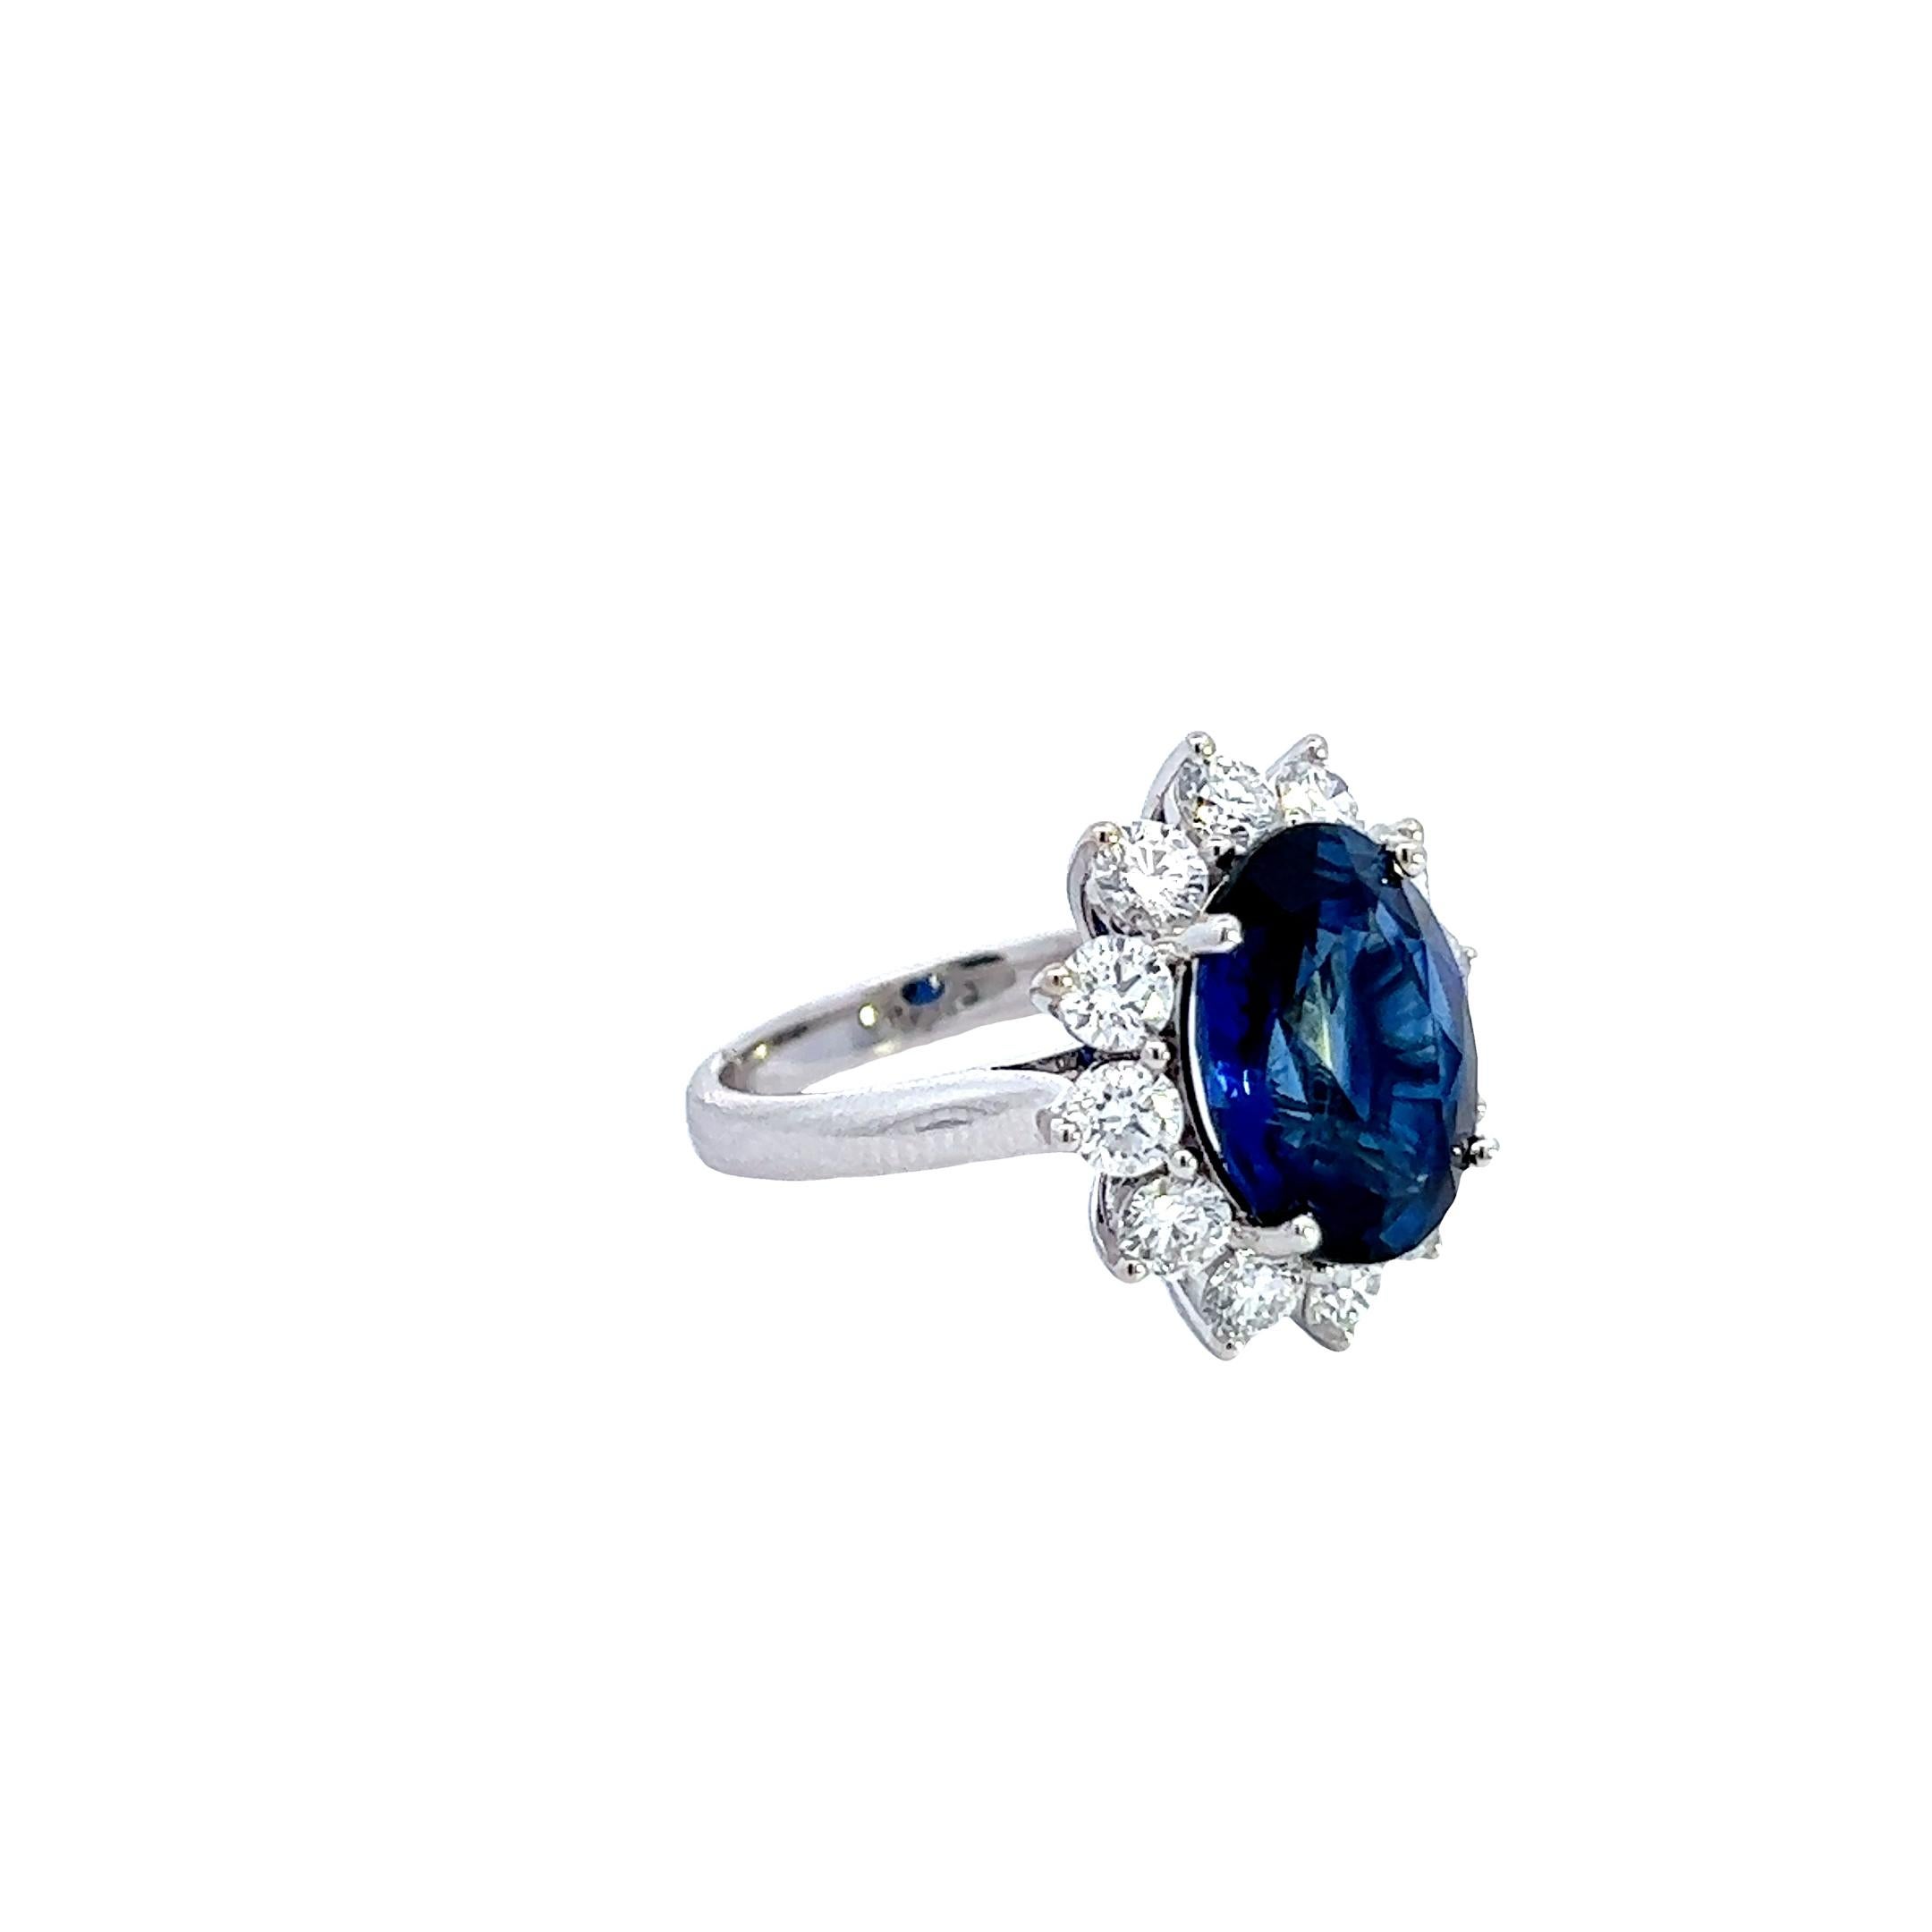 Beauty 18k White Gold Ceylon Sapphire Ring, 6.46ct, Christian Dunaigre Certified In New Condition For Sale In Great Neck Plaza, NY